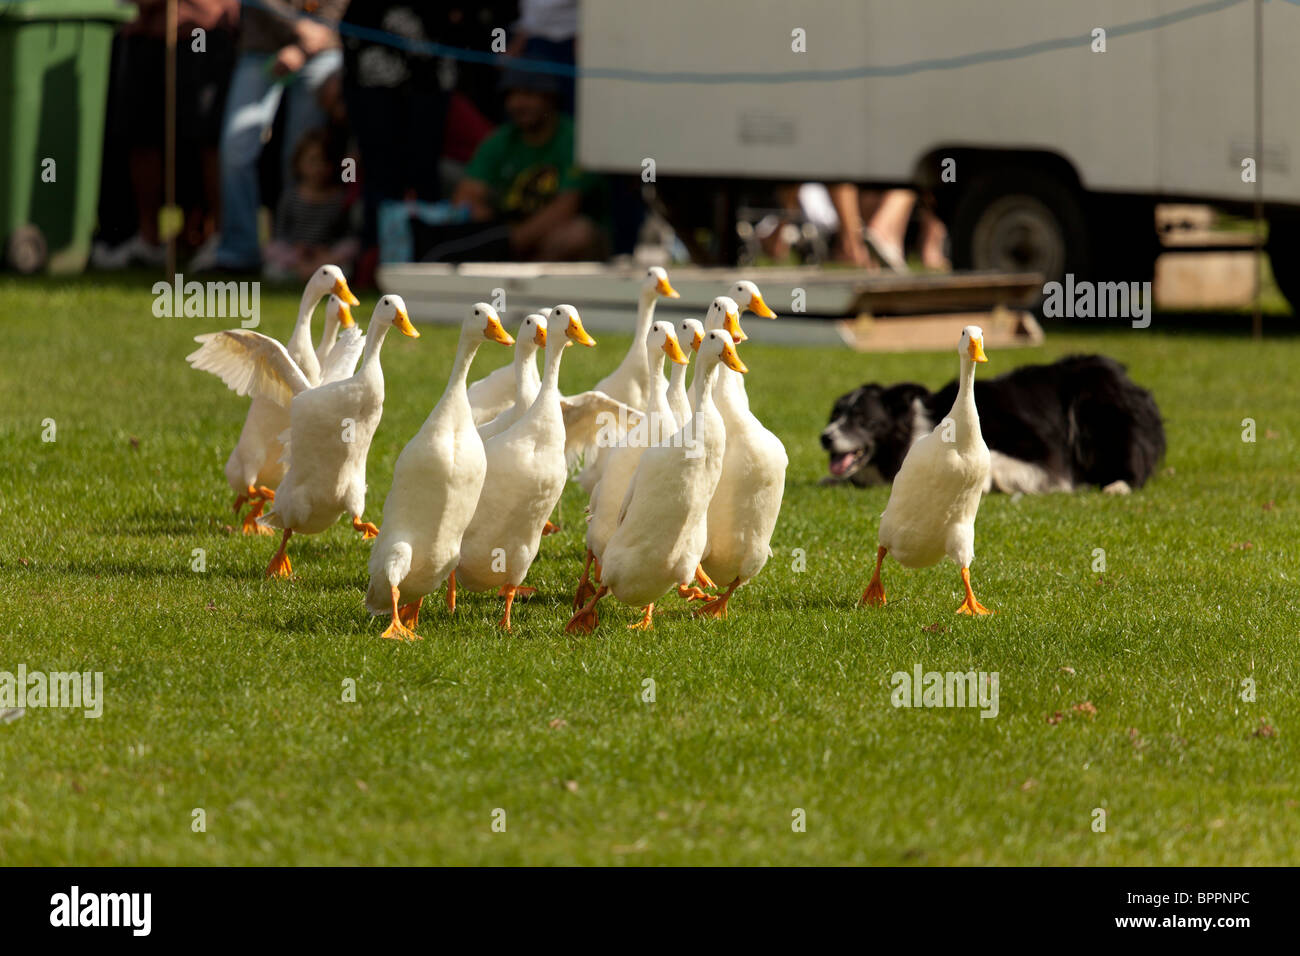 sheepdog trial demonstration at country fair using indian runner ducks Stock Photo